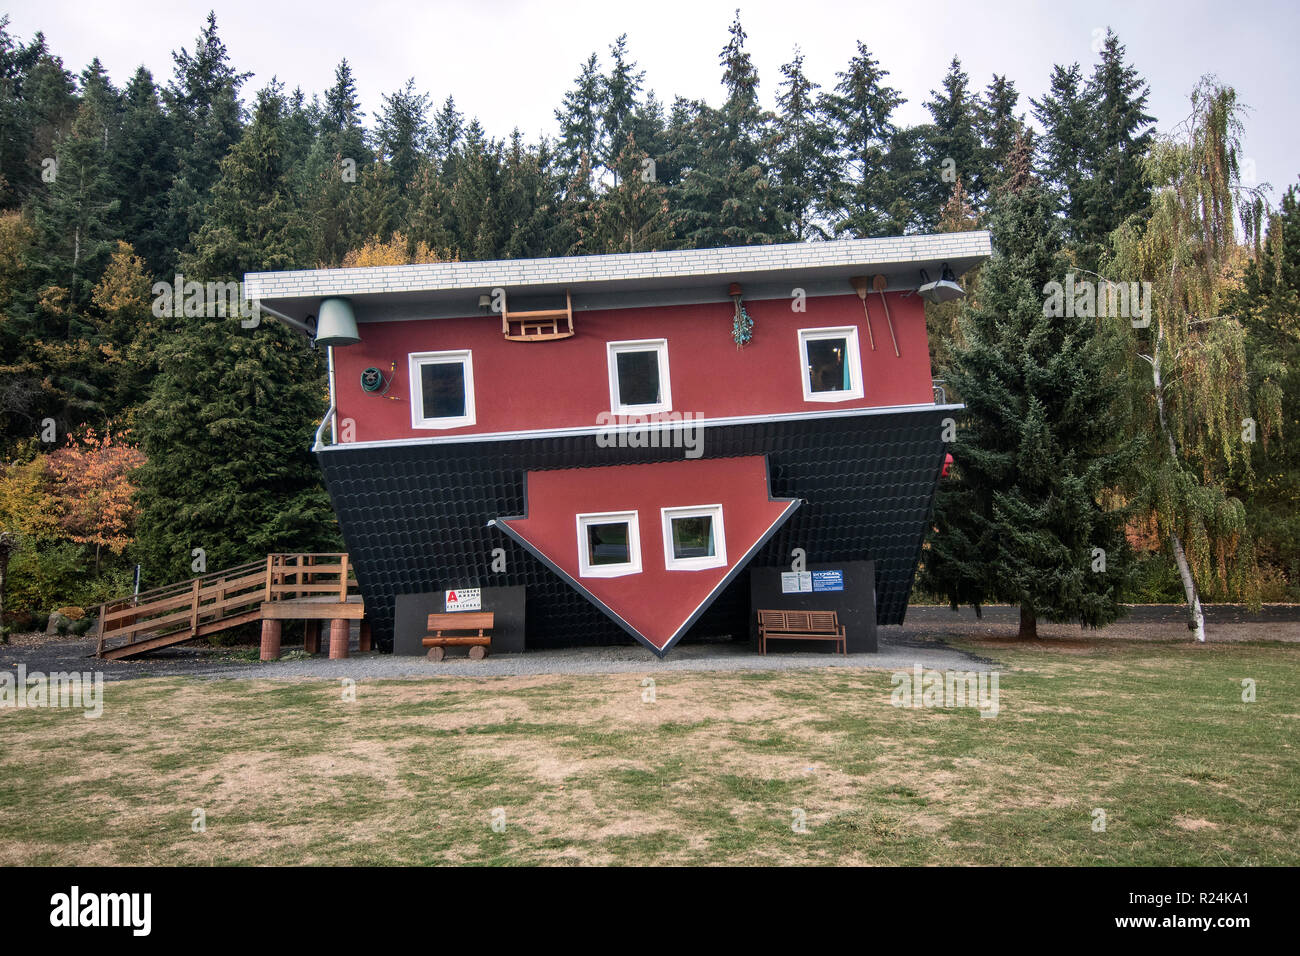 The 'Crazy House'  at the Edersee reservoir in North Hessen. Strange upside-down house which one can visit. Stock Photo